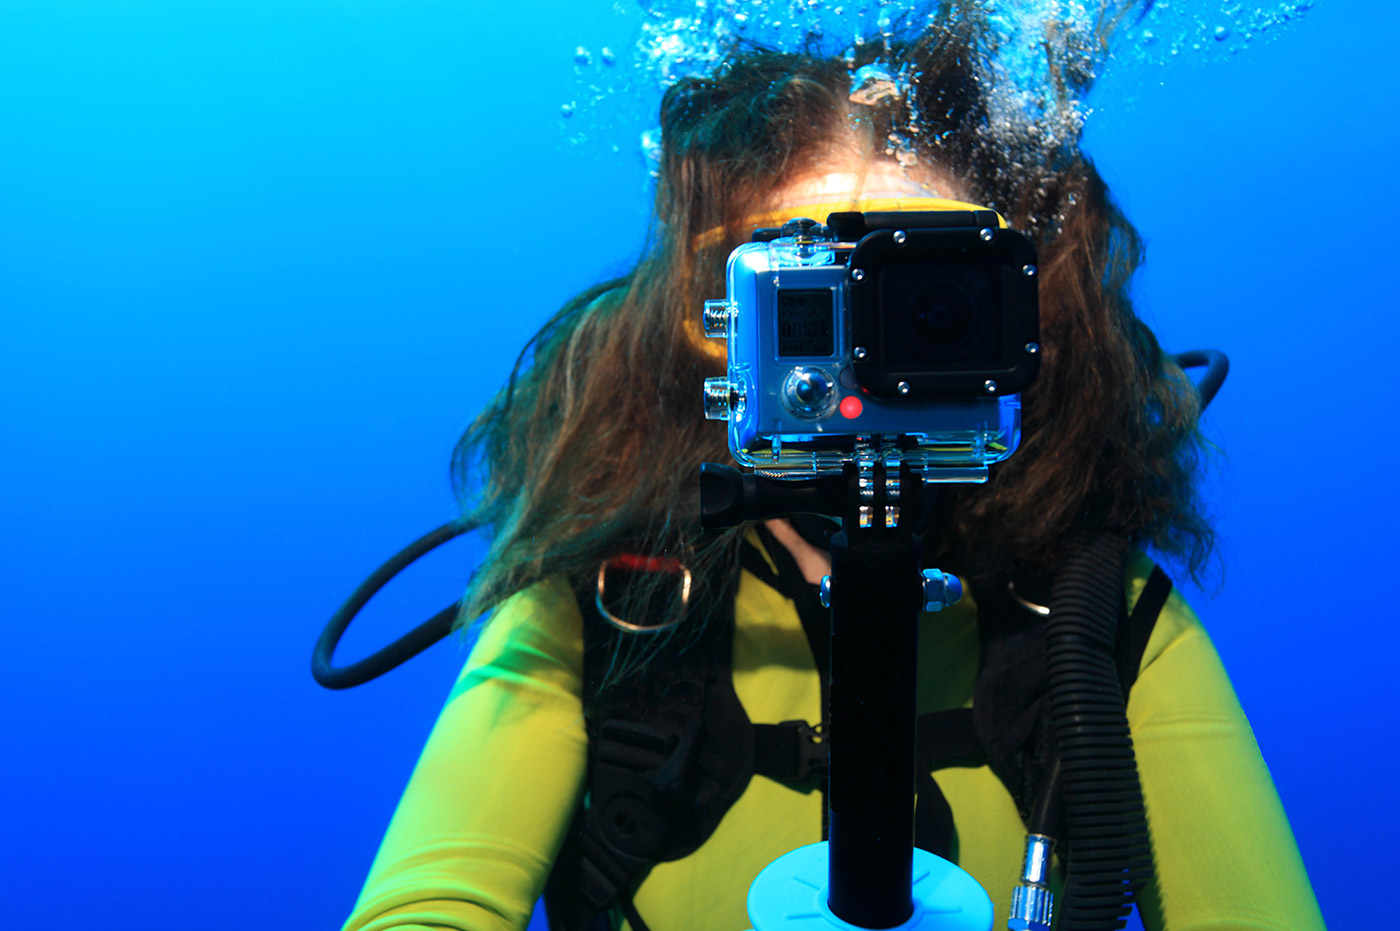 Woman snorkeling underwater with a GoPro camera.